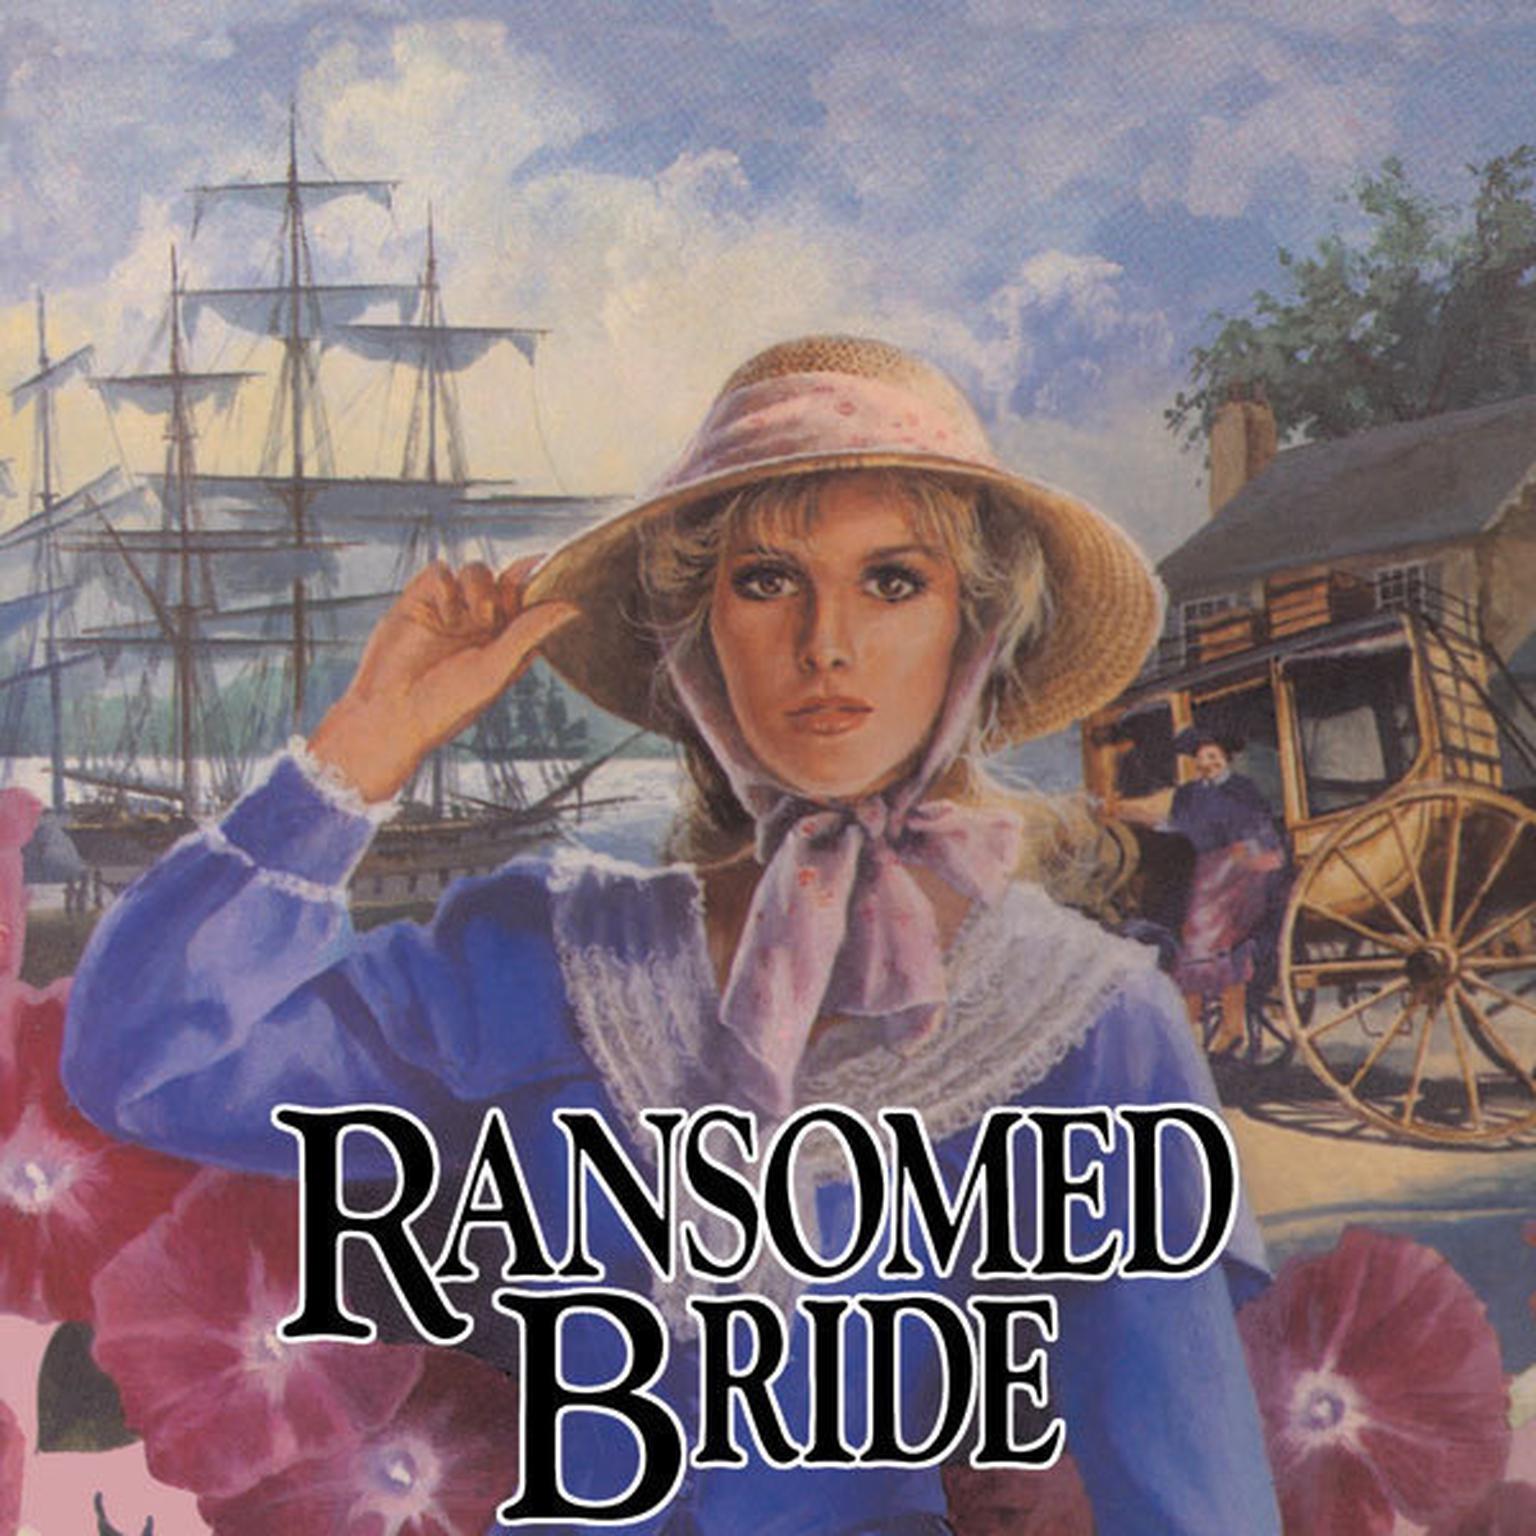 Ransomed Bride: Book 2 Audiobook, by Jane Peart